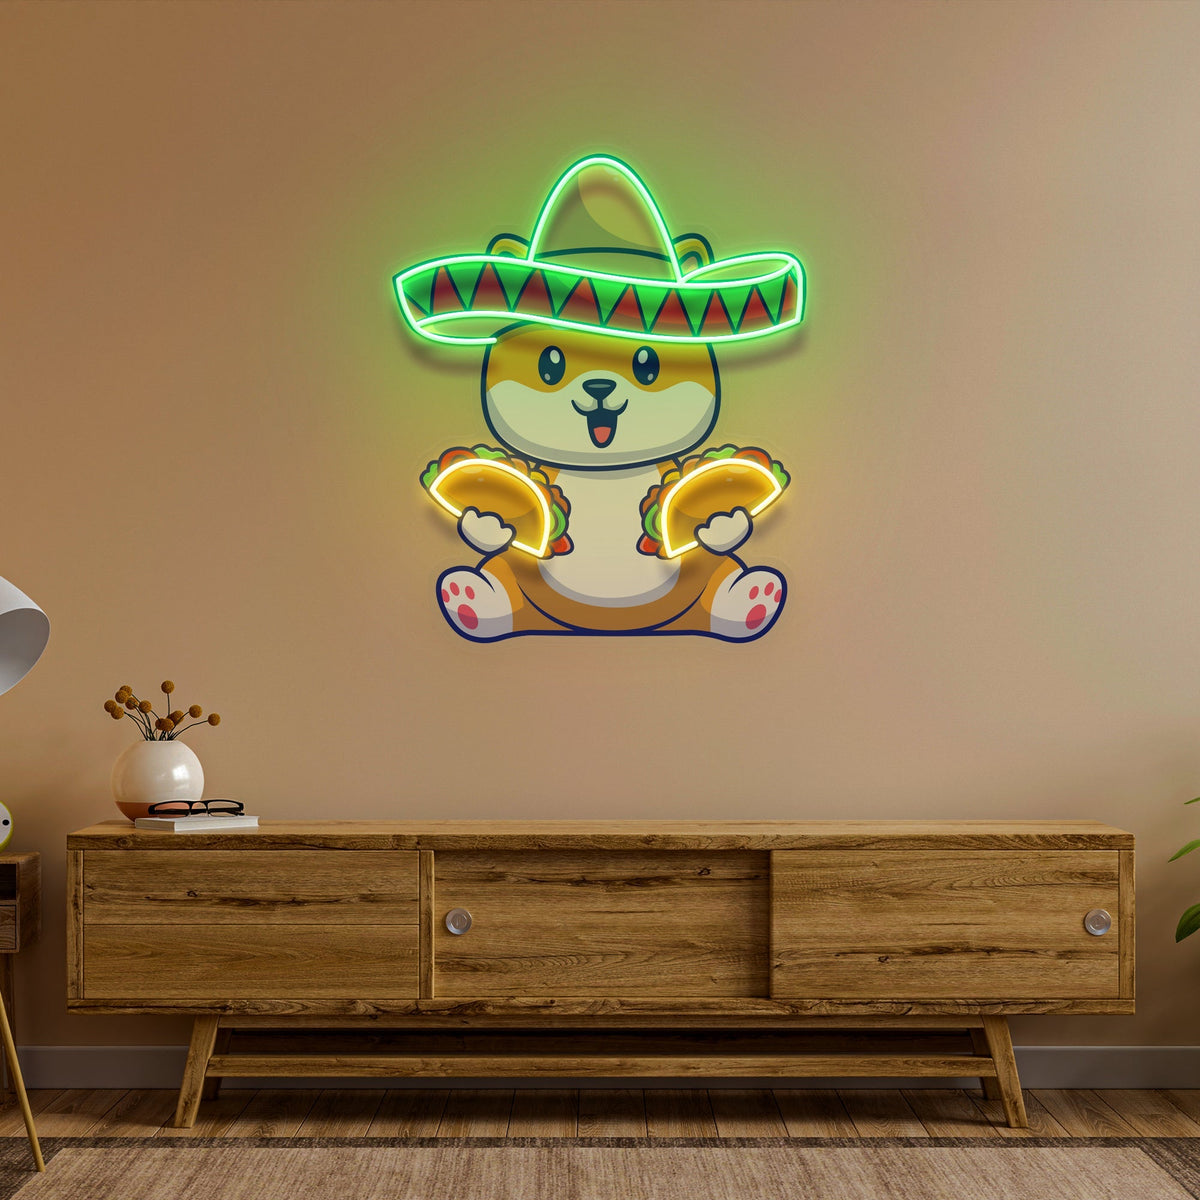 Cute Dog Eating Tacos With Sombreno Hat Artwork Led Neon Sign Light